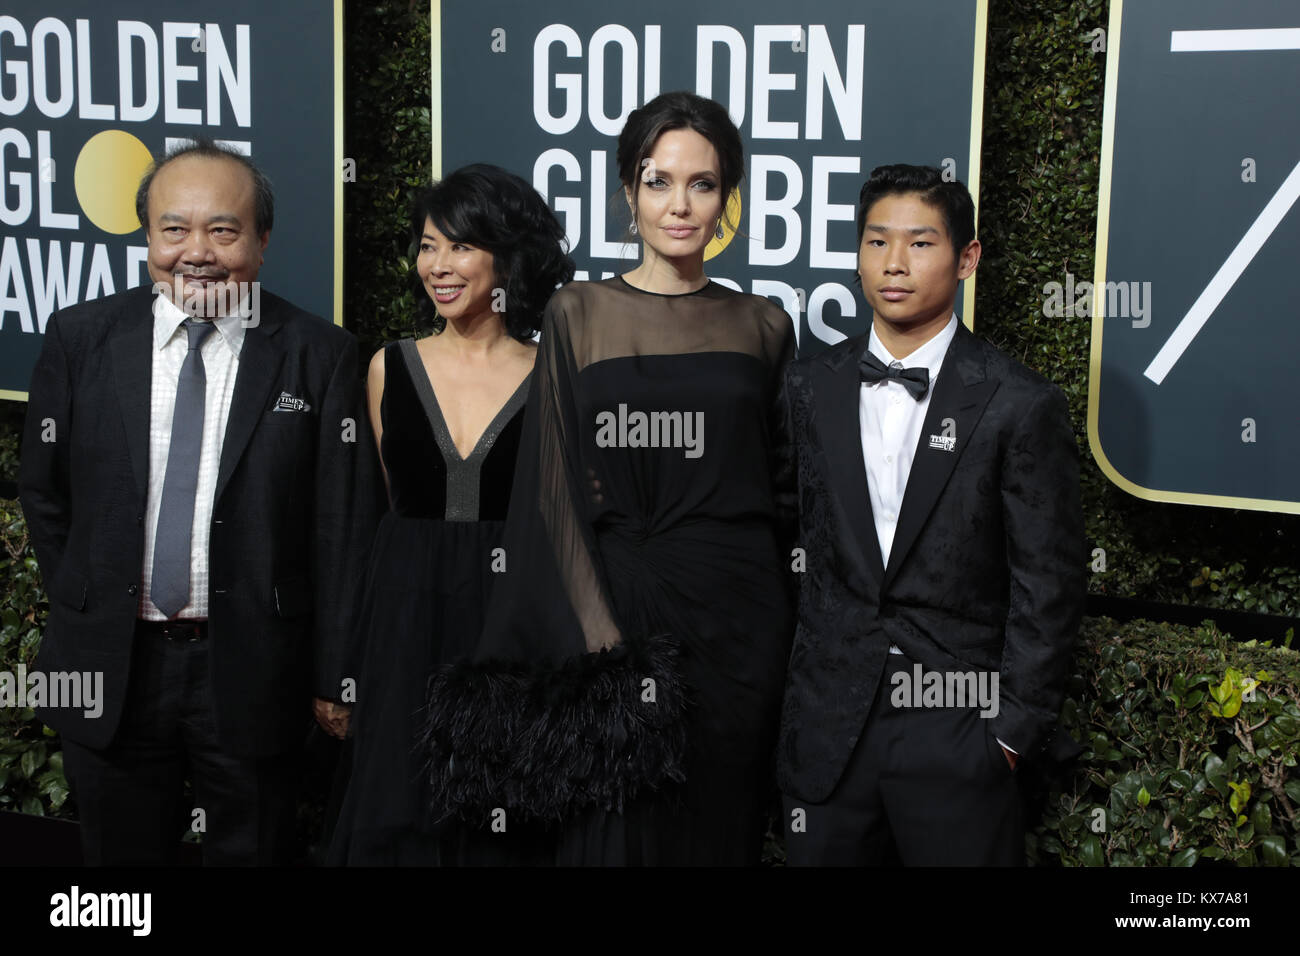 Beverly Hills, California, USA. 7th Jan, 2018. Filmmaker Rithy Panh, activist Loung Ung, actor director Angelina Jolie and Pax Thien Jolie-Pitt arrives for the 75th Annual Golden Globe Awards at Beverly Hilton Hotel in Beverly Hills, California on January 7, 2018. Credit: Mpi2006/Media Punch/Alamy Live News Stock Photo